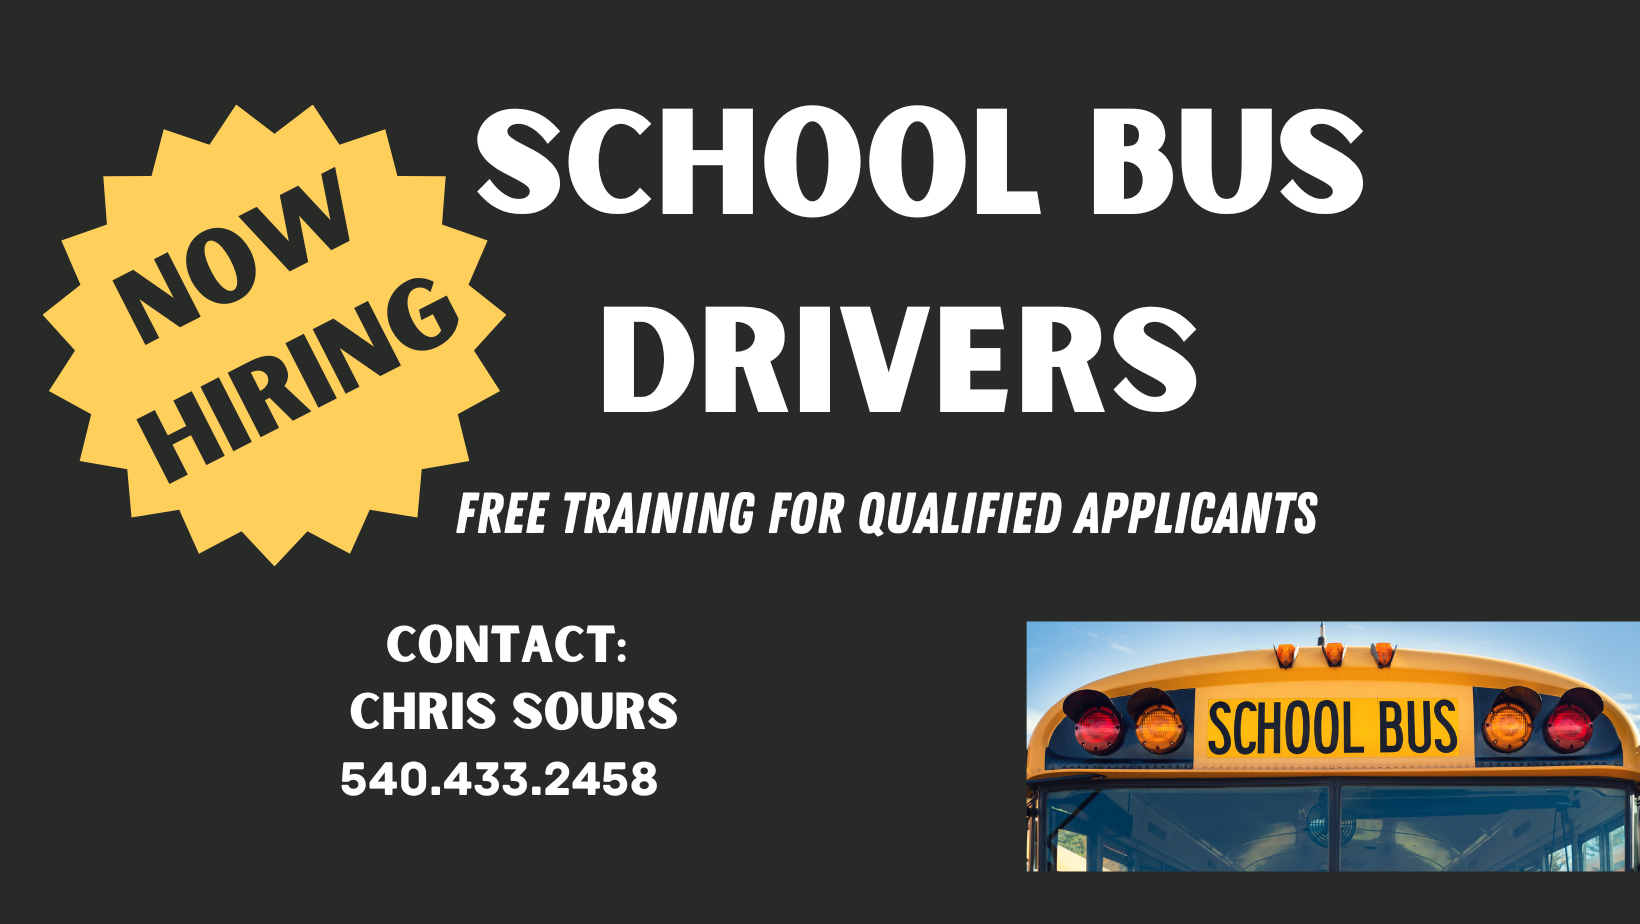 now hiring school bus drivers FREE TRAINING FOR QUALIFIED APPLICANTS CONTACT: JEREMY MASON OR CHRIS SOURS 540.433.2458